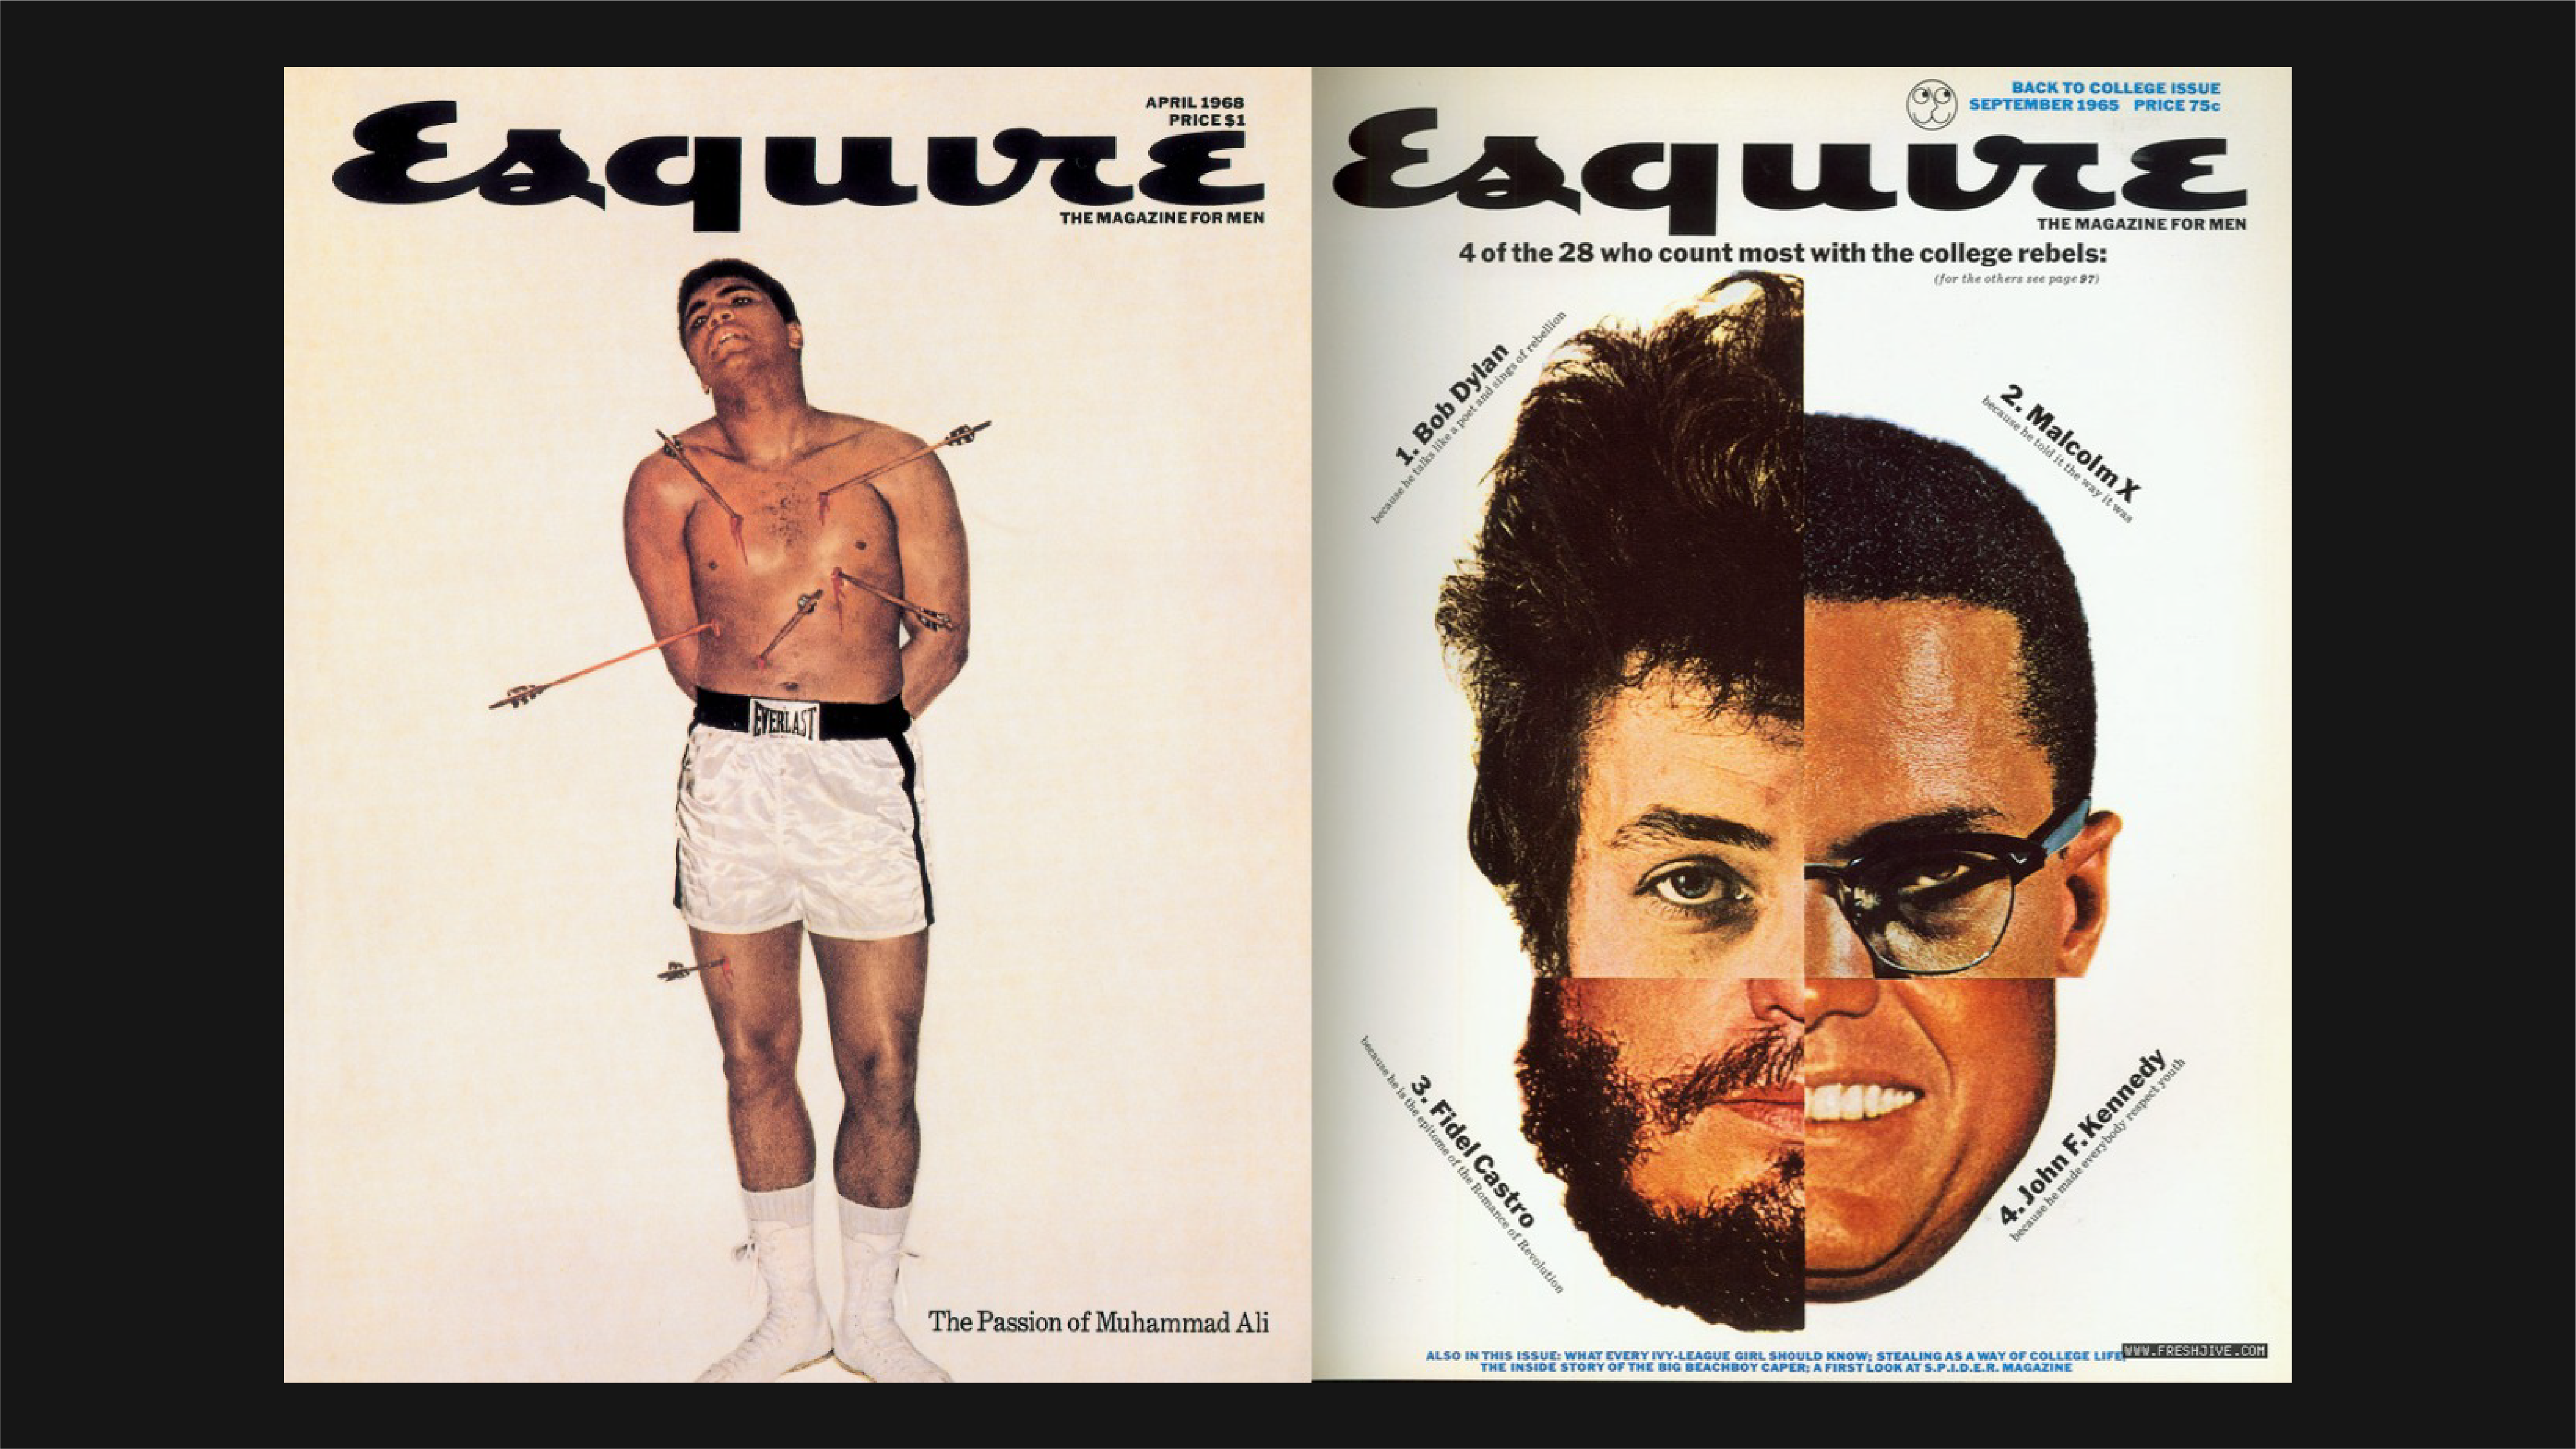 George Lois Esquire covers